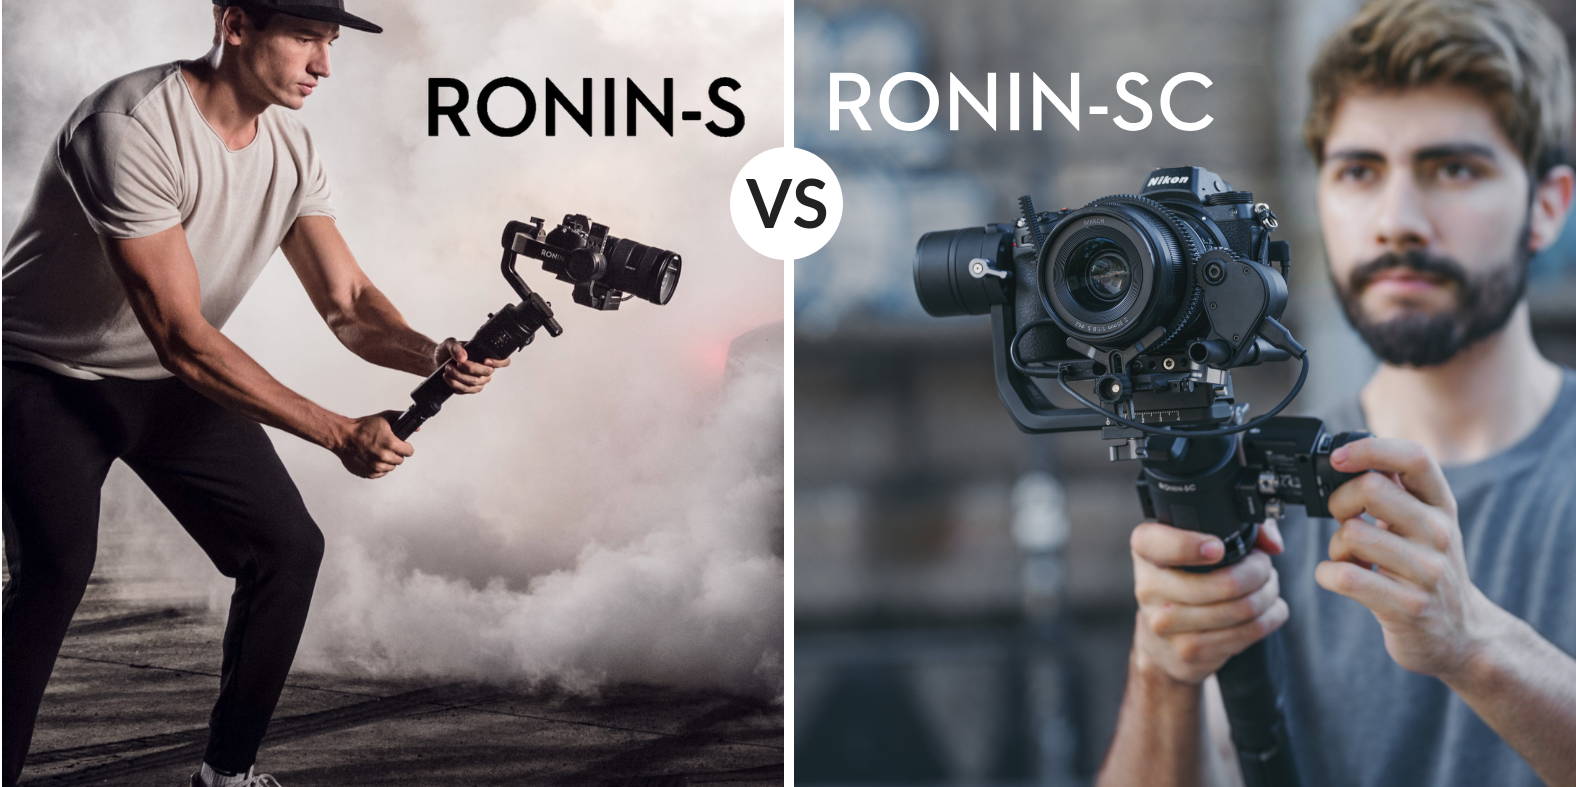 DJI Ronin-S VS DJI Ronin-SC Comparison | Which Gimbal Is Right For You?